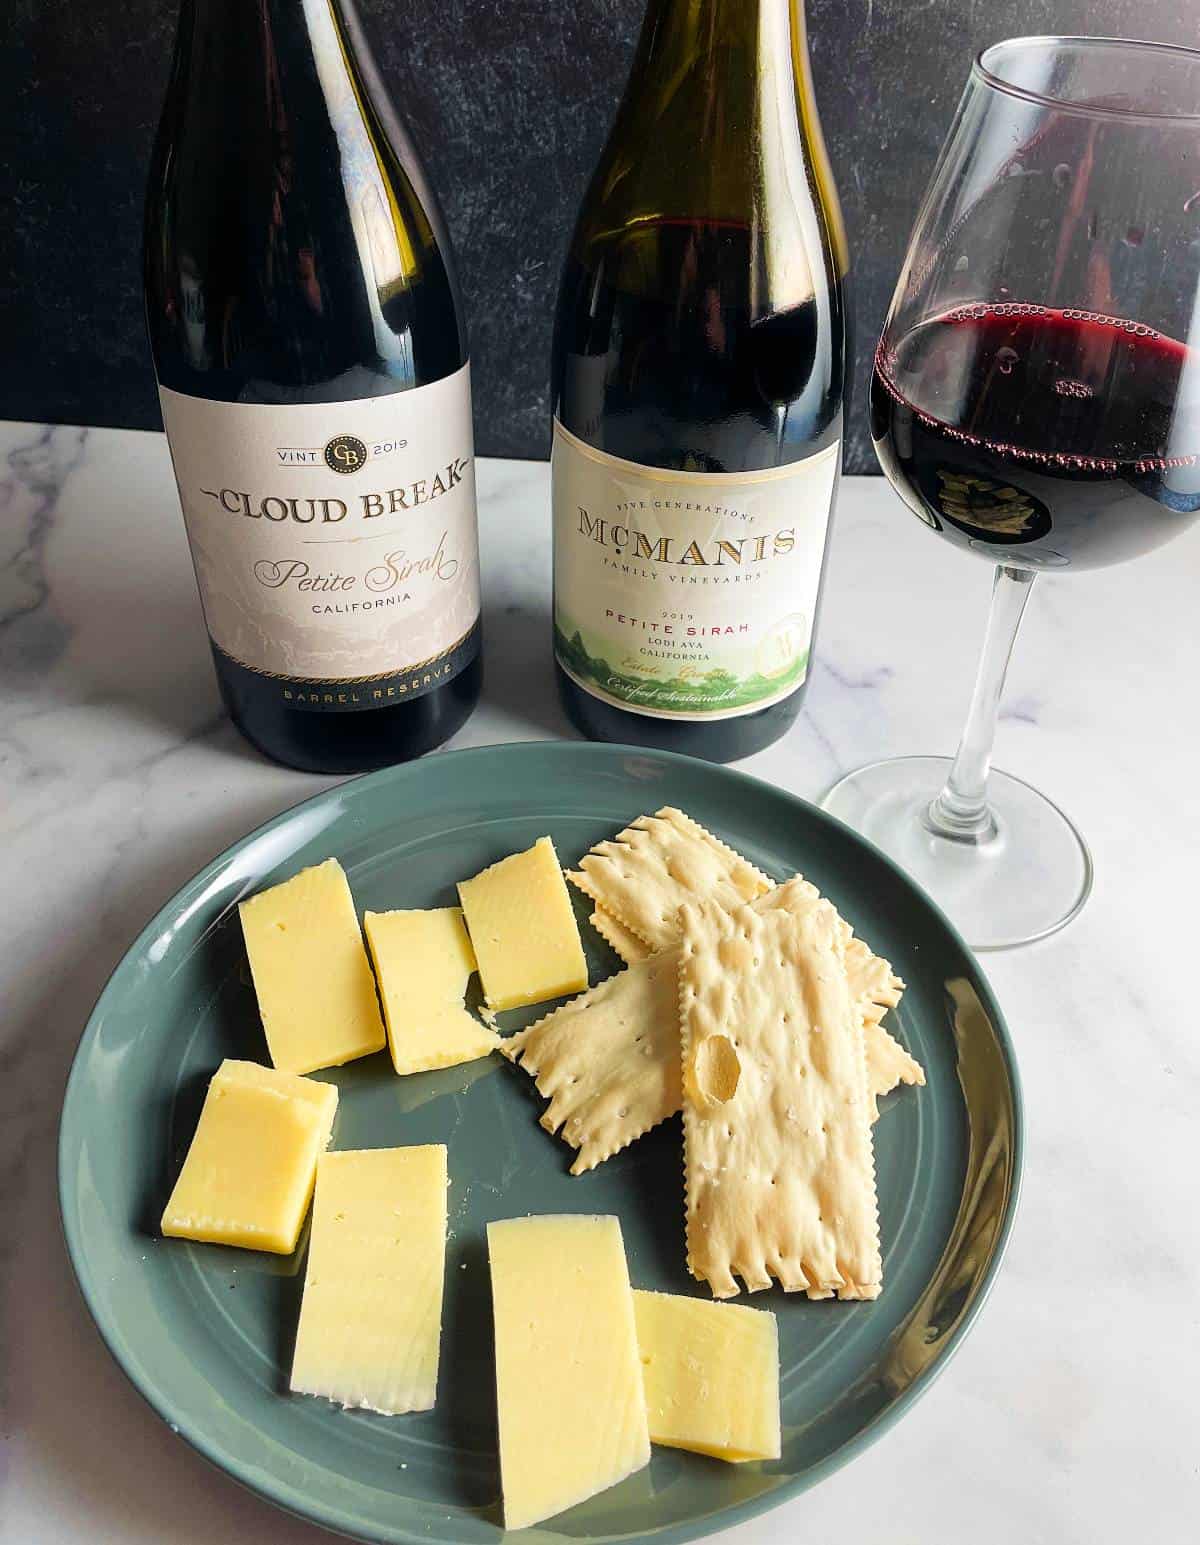 a turquoise plate with slices of cheddar cheese and crackers. Two bottles of Petite Sirah wine in the background.